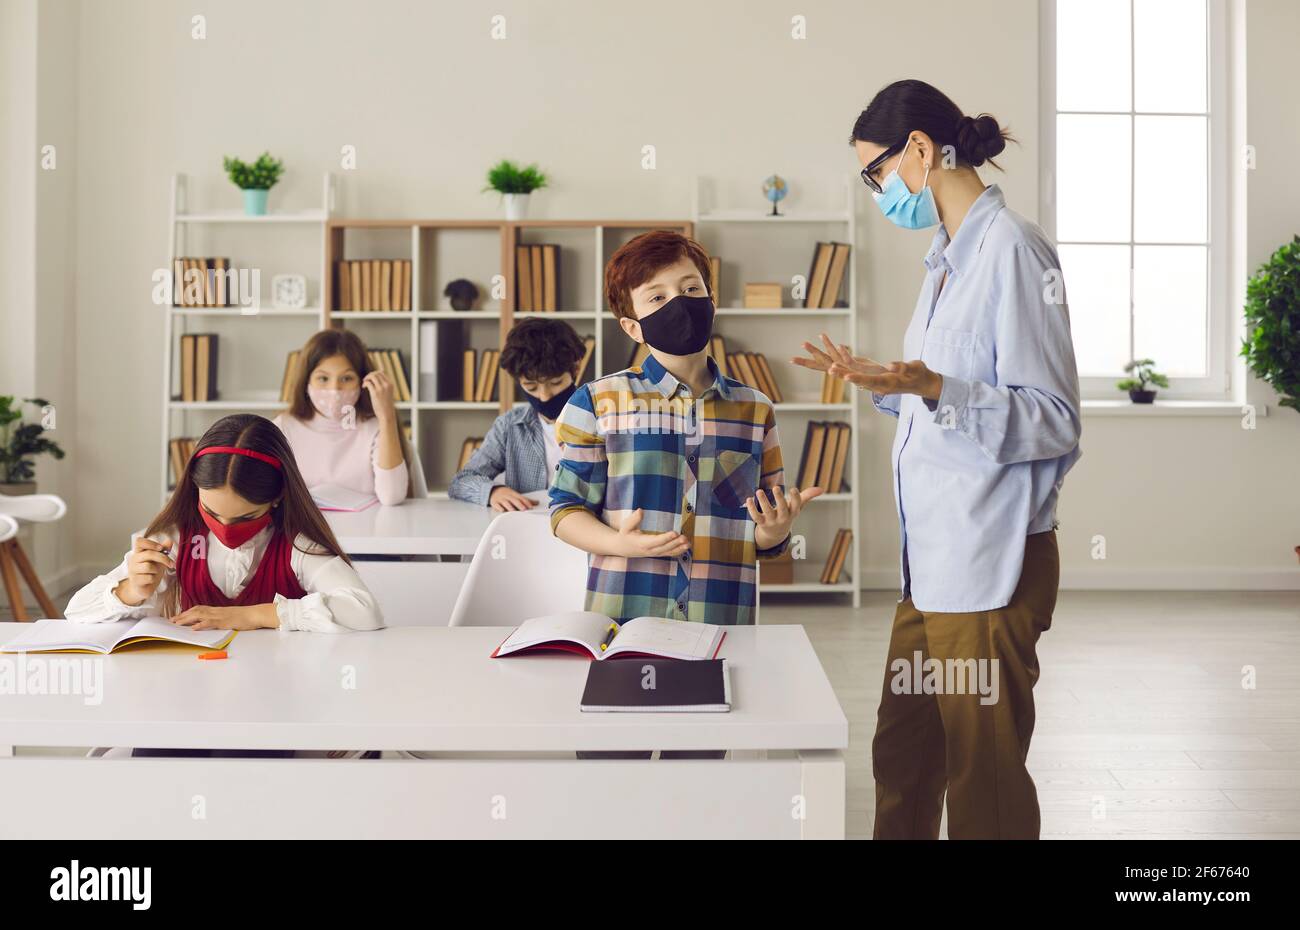 Elementary school student in medical face mask answering teacher's question in class Stock Photo